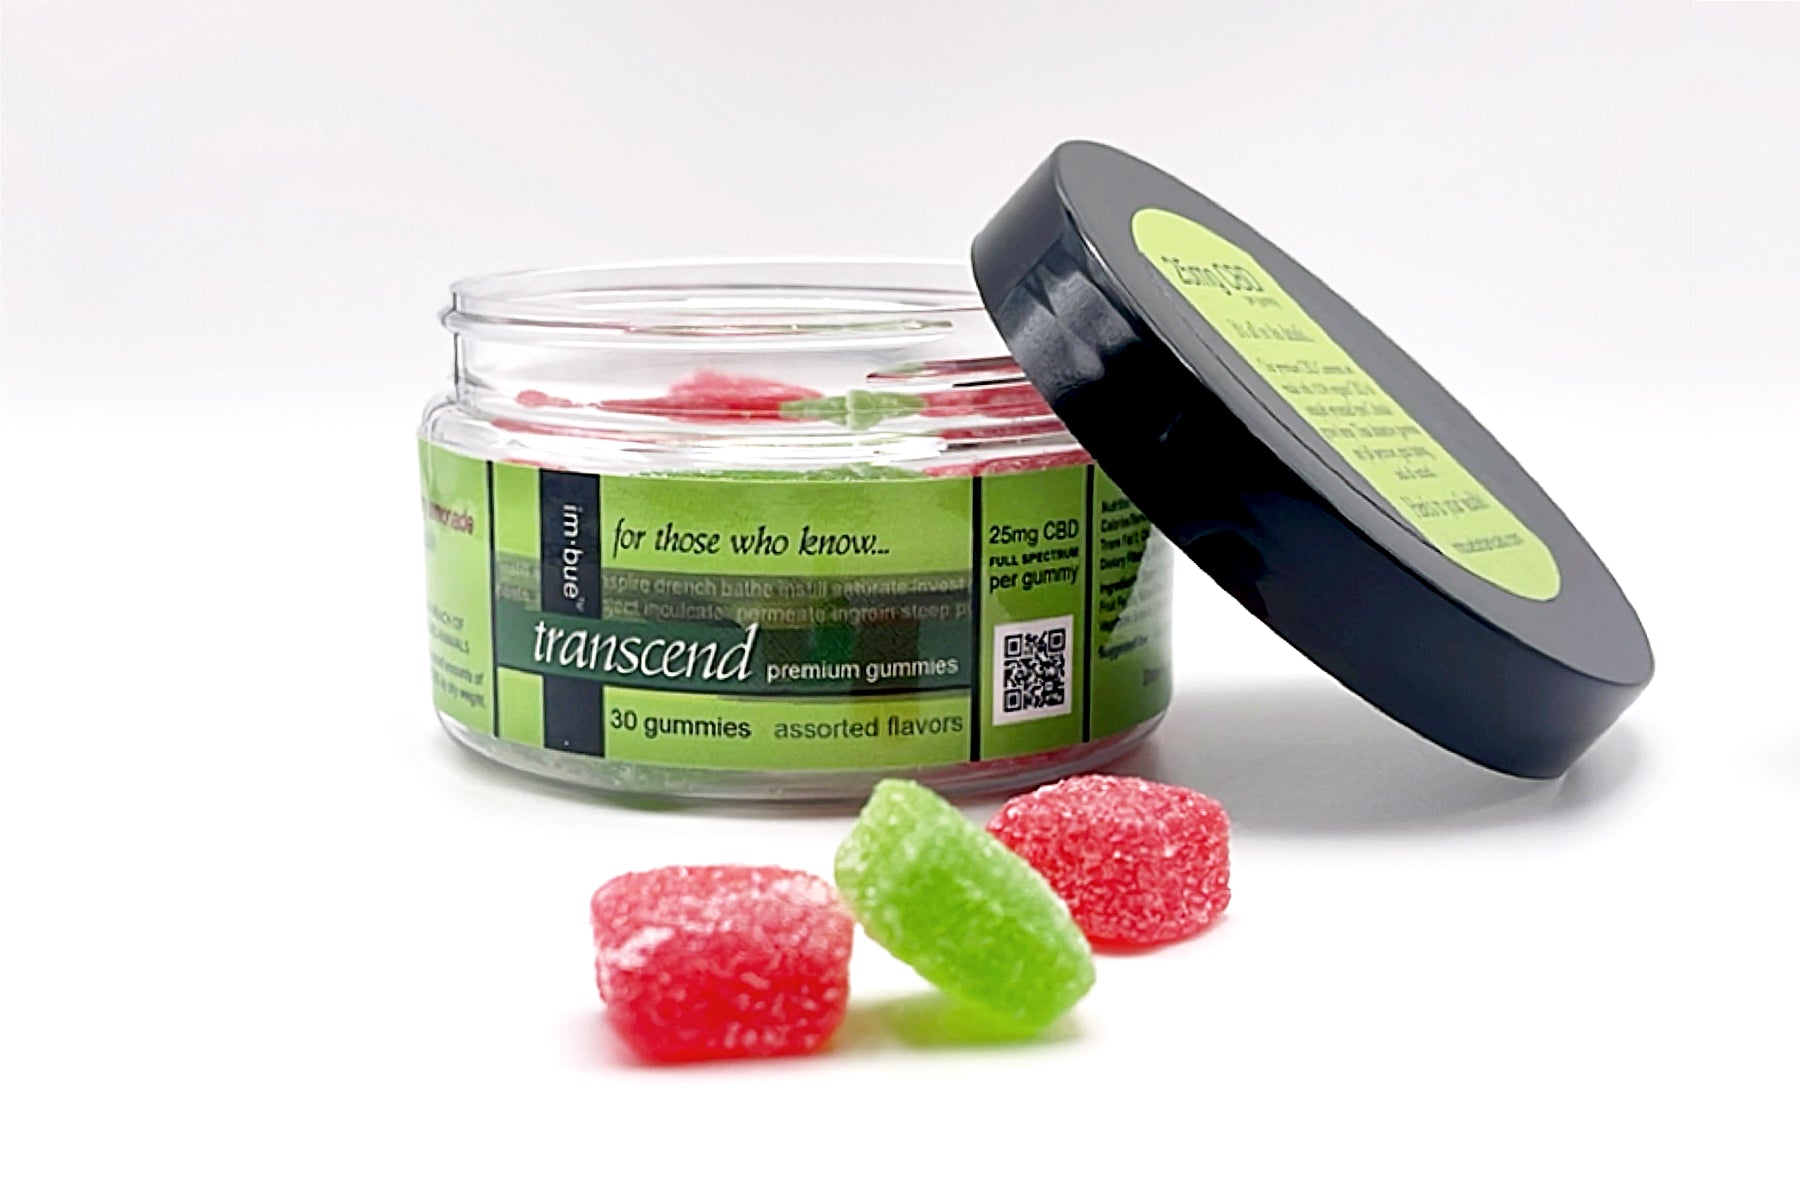 25mg CBD gummies 30 count jar with gummies in front